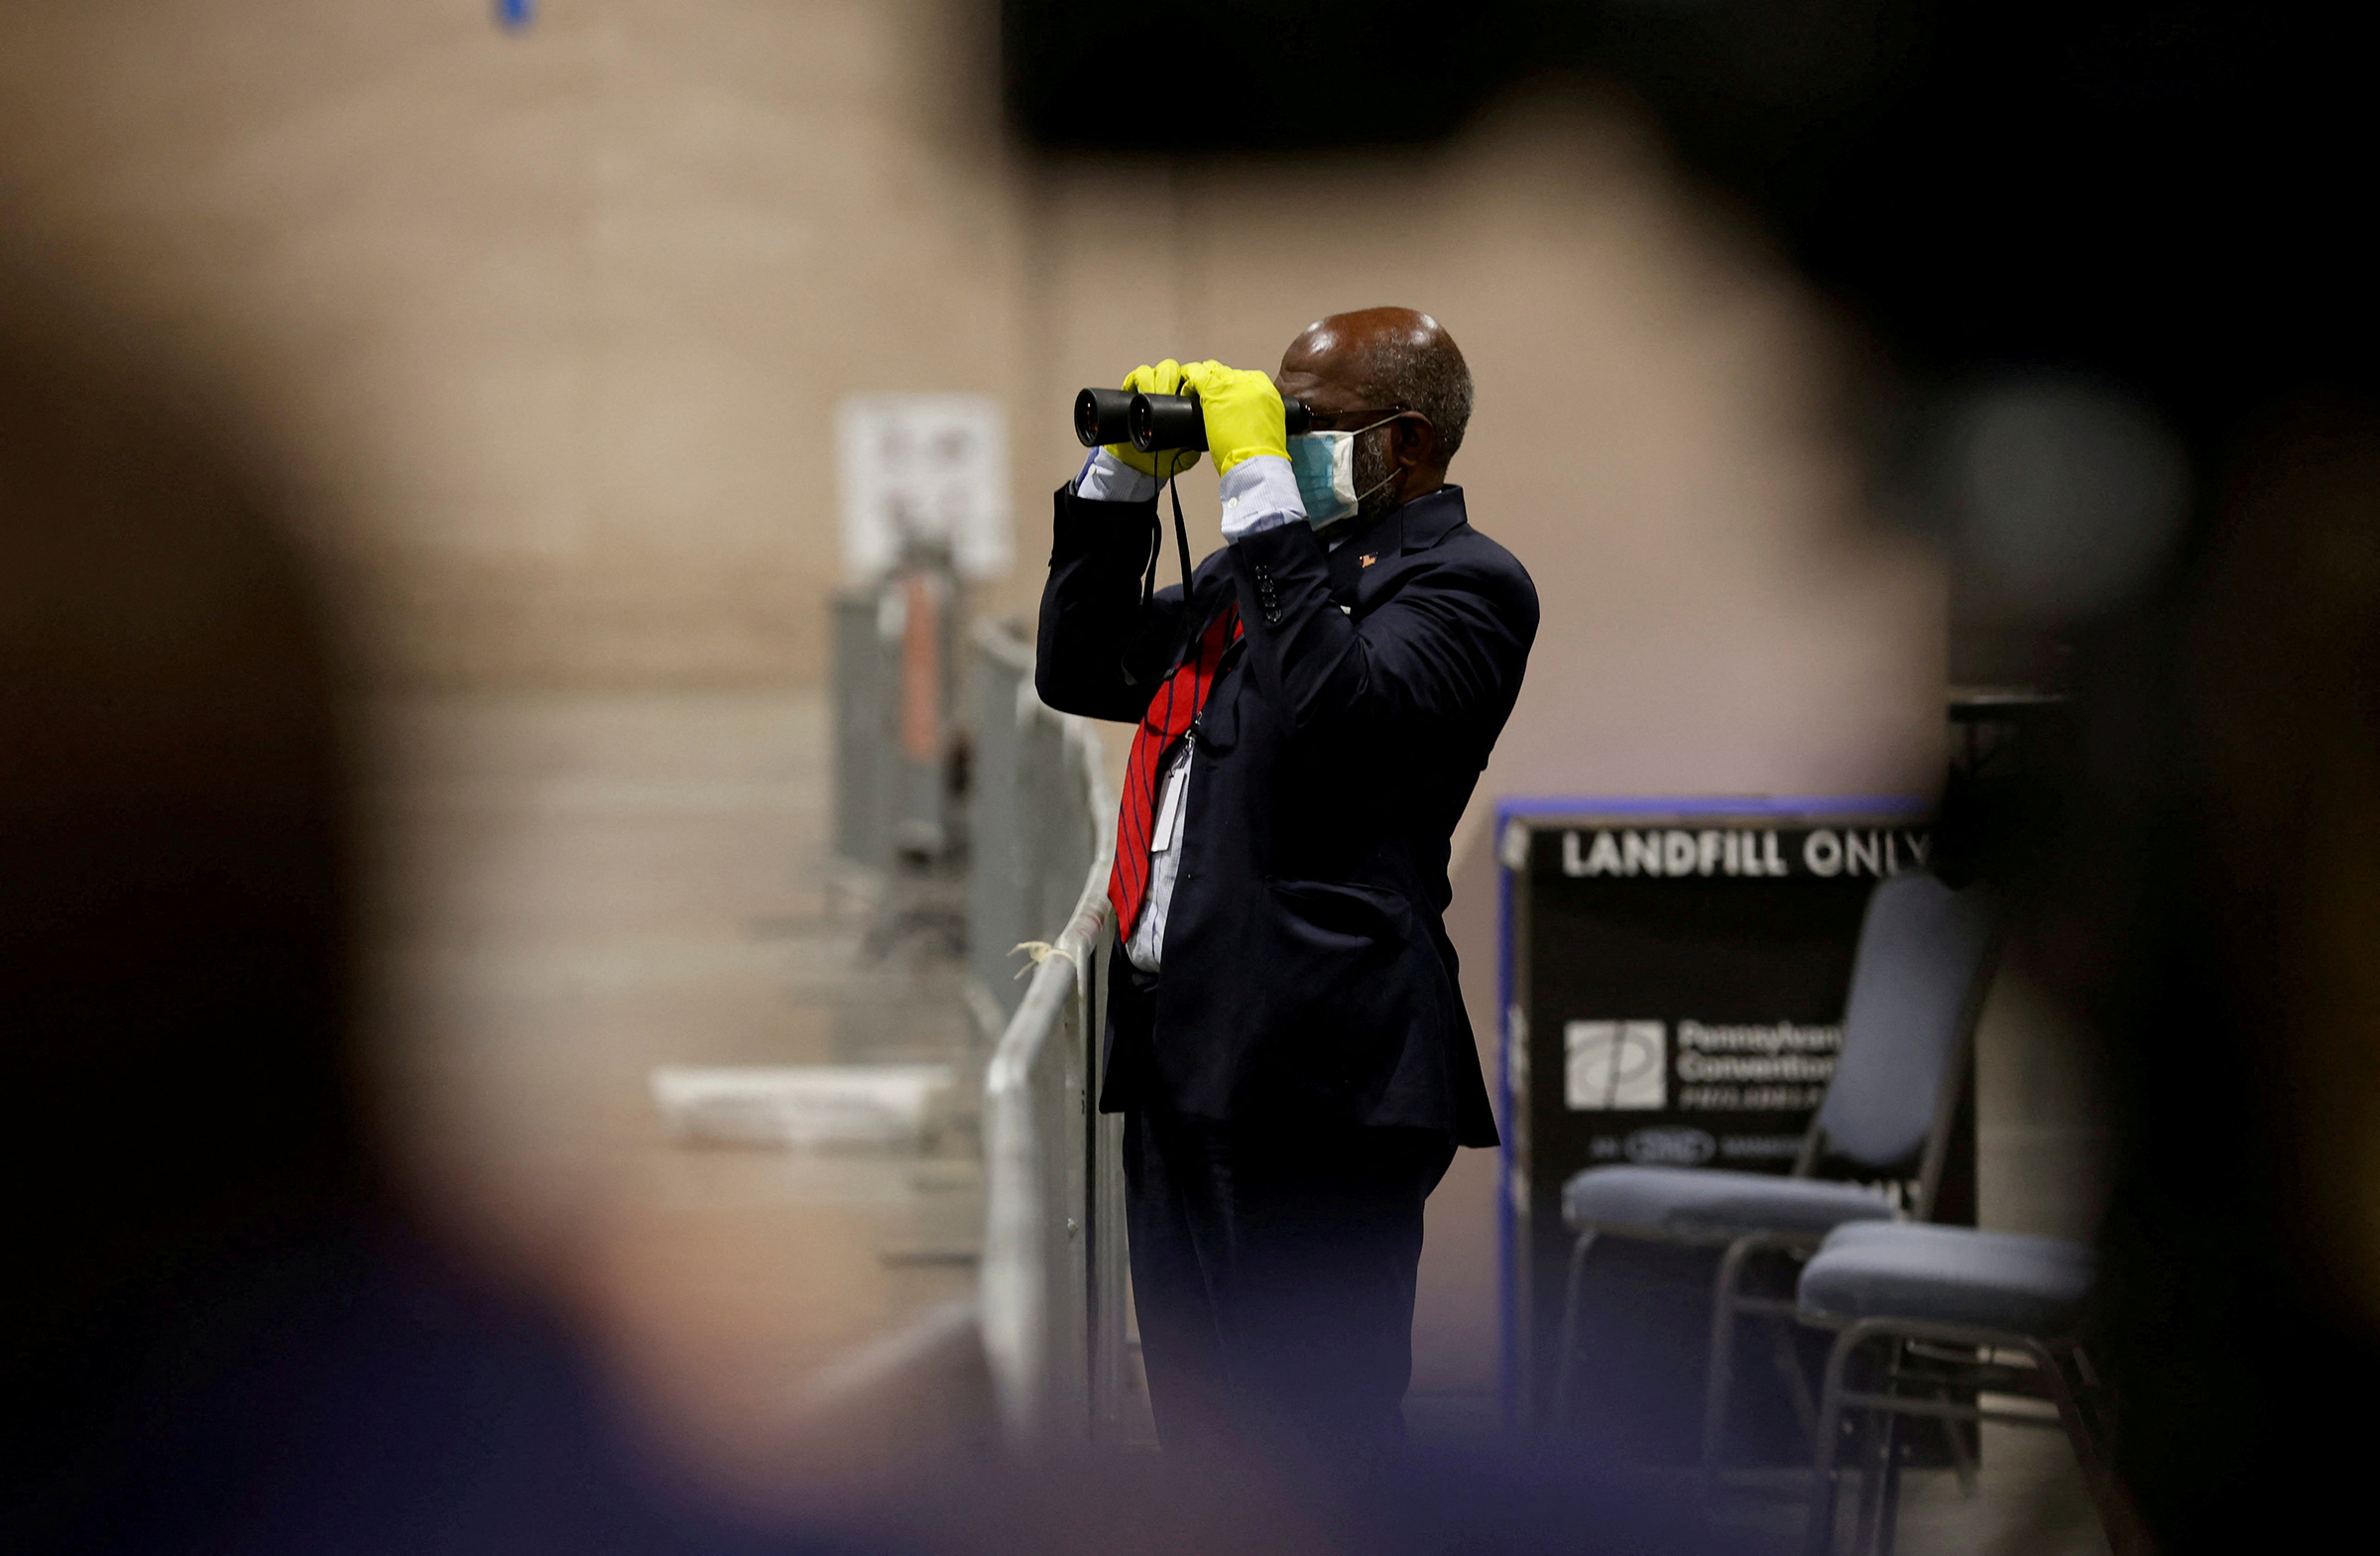 A poll watcher observes through a pair of binoculars as votes are counted at the Pennsylvania Convention Center in Philadelphia, on Nov. 3, 2020. (Rachel Wisniewski—Reuters)